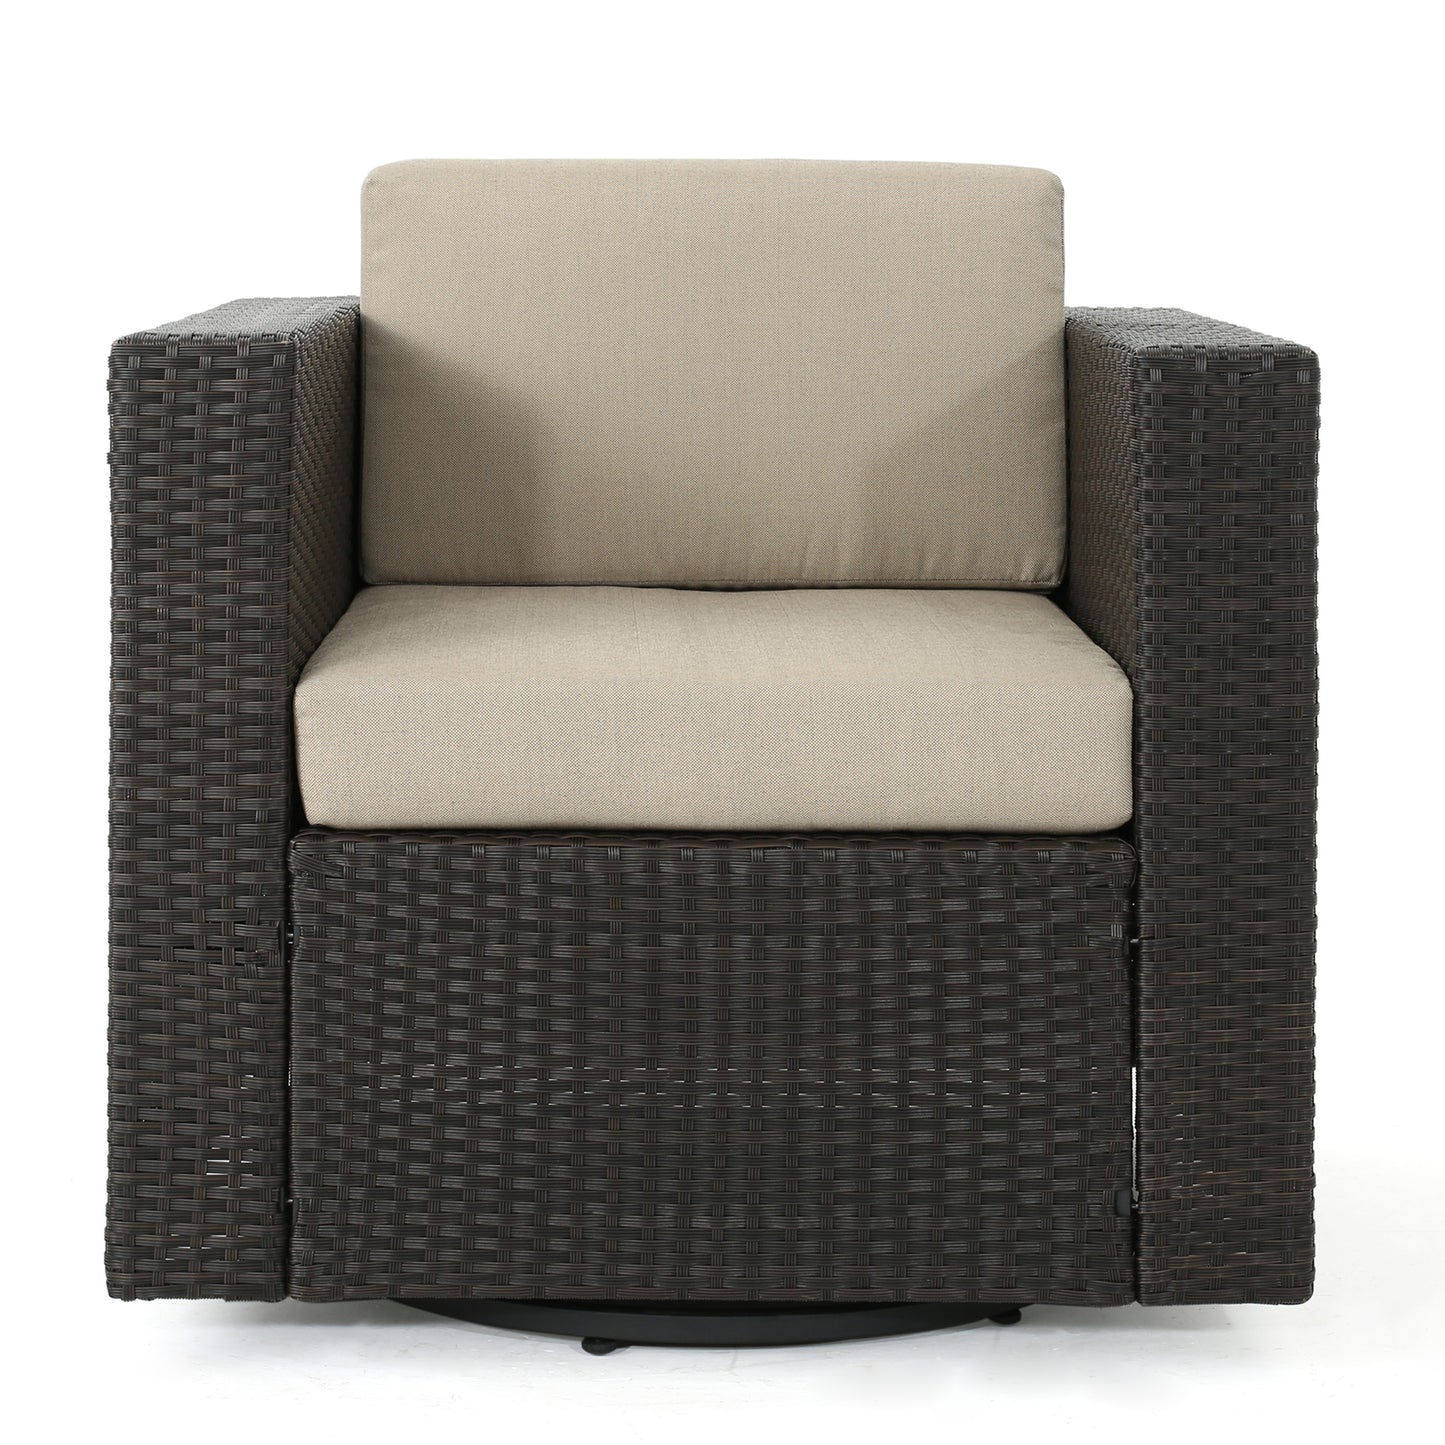 Venice Outdoor Wicker Swivel Club Chairs with Cushions